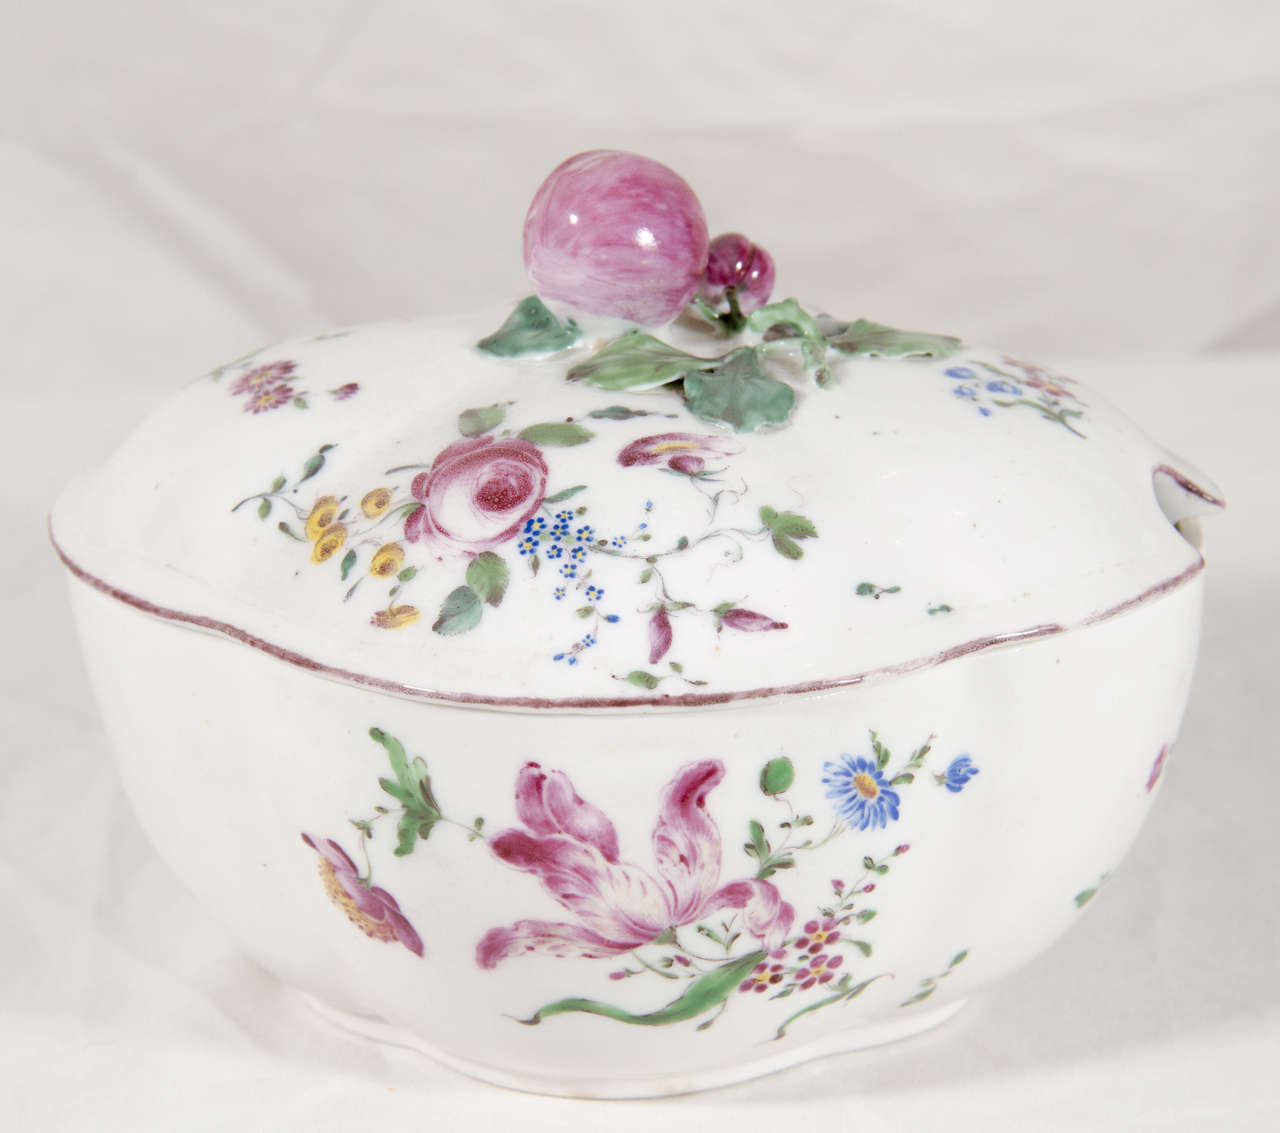 The Mennecy porcelain manufactory produced fine quality soft-paste porcelain wares decorated with flowers richly painted in enamel colors, among them the distinctive purple-rose hue seen on this tureen. The factory was active from 1735 until